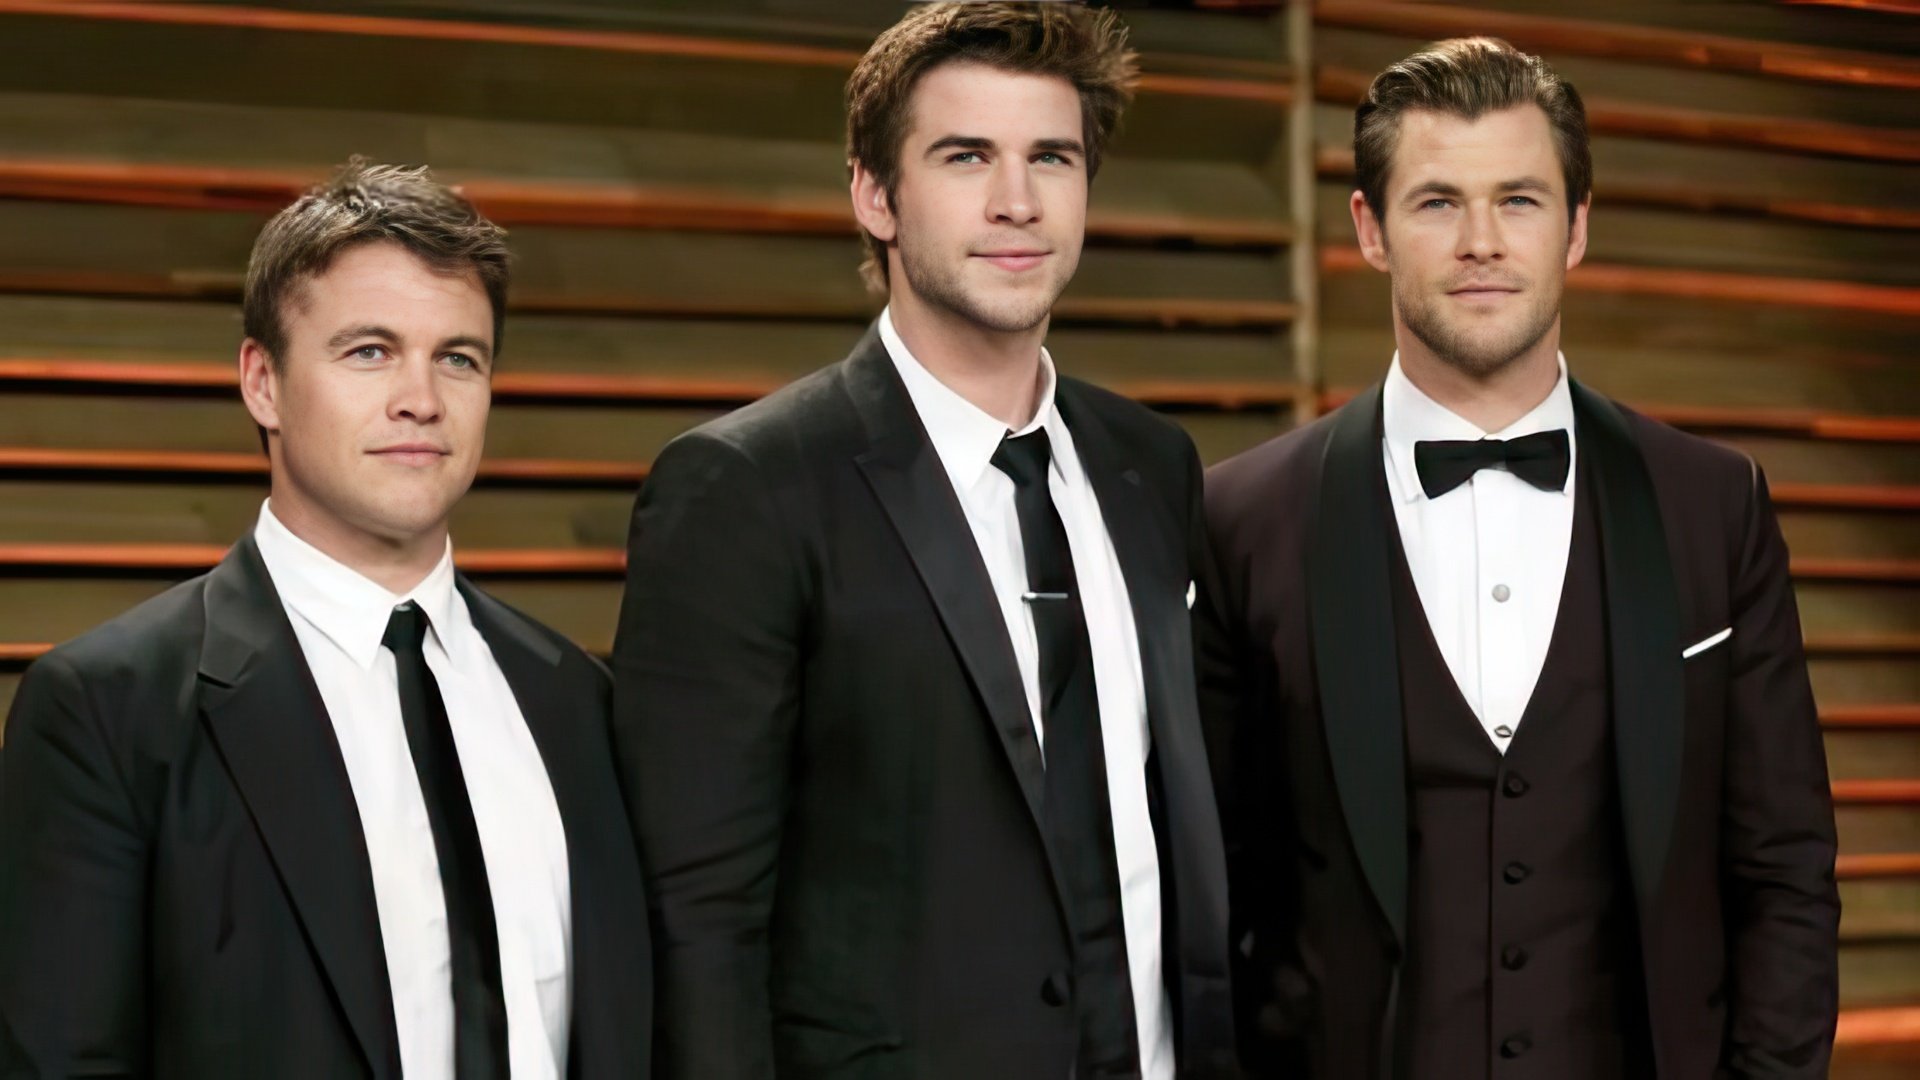 Liam (in the middle) is the Youngest of Hemsworth’s Brothers